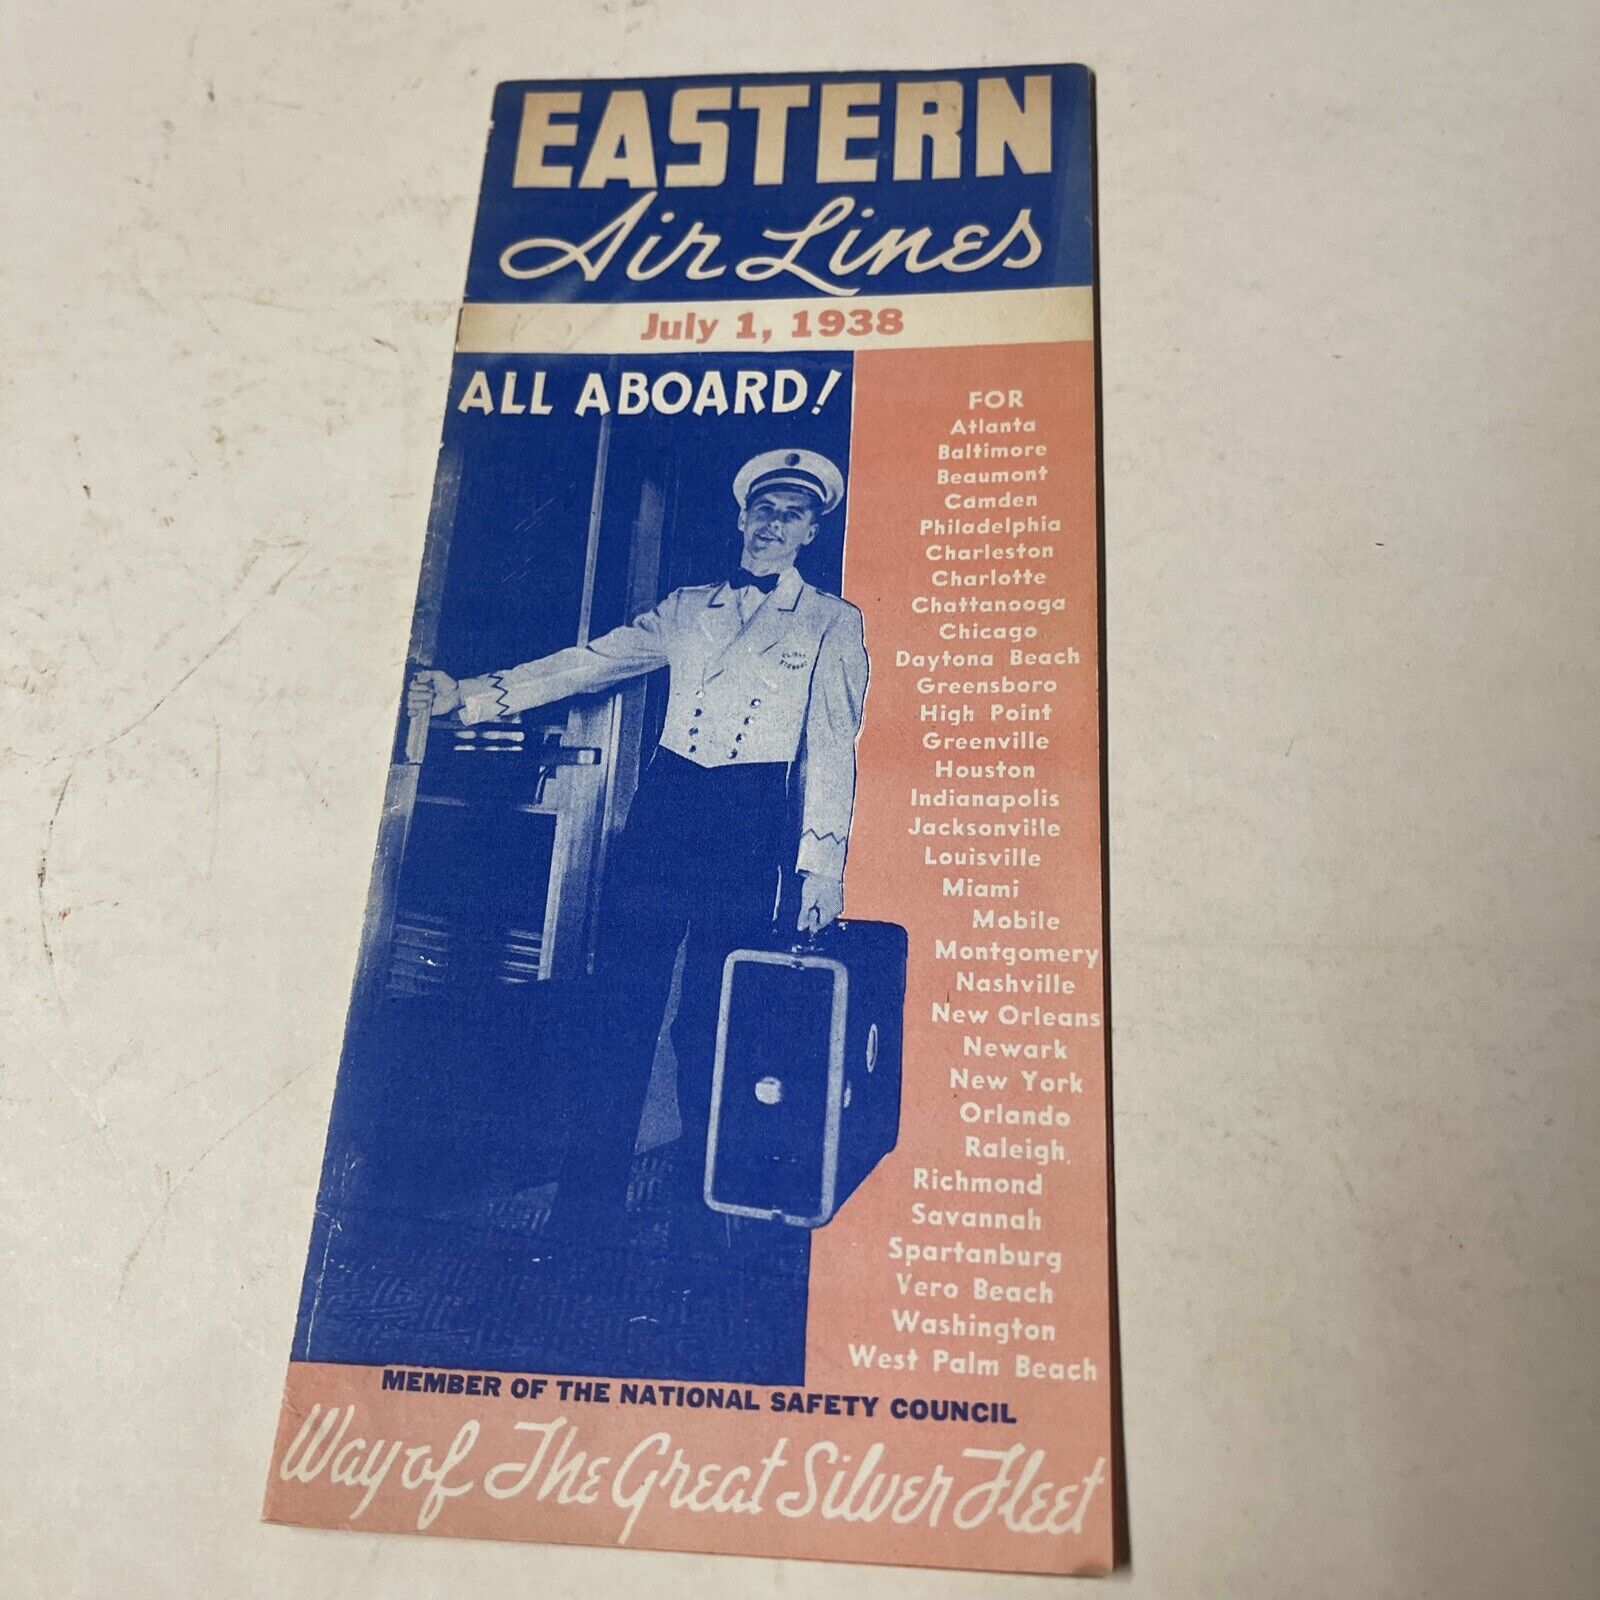 Eastern Air  AIRLINE July 1938 TIMETABLE SCHEDULE Brochure flight cover